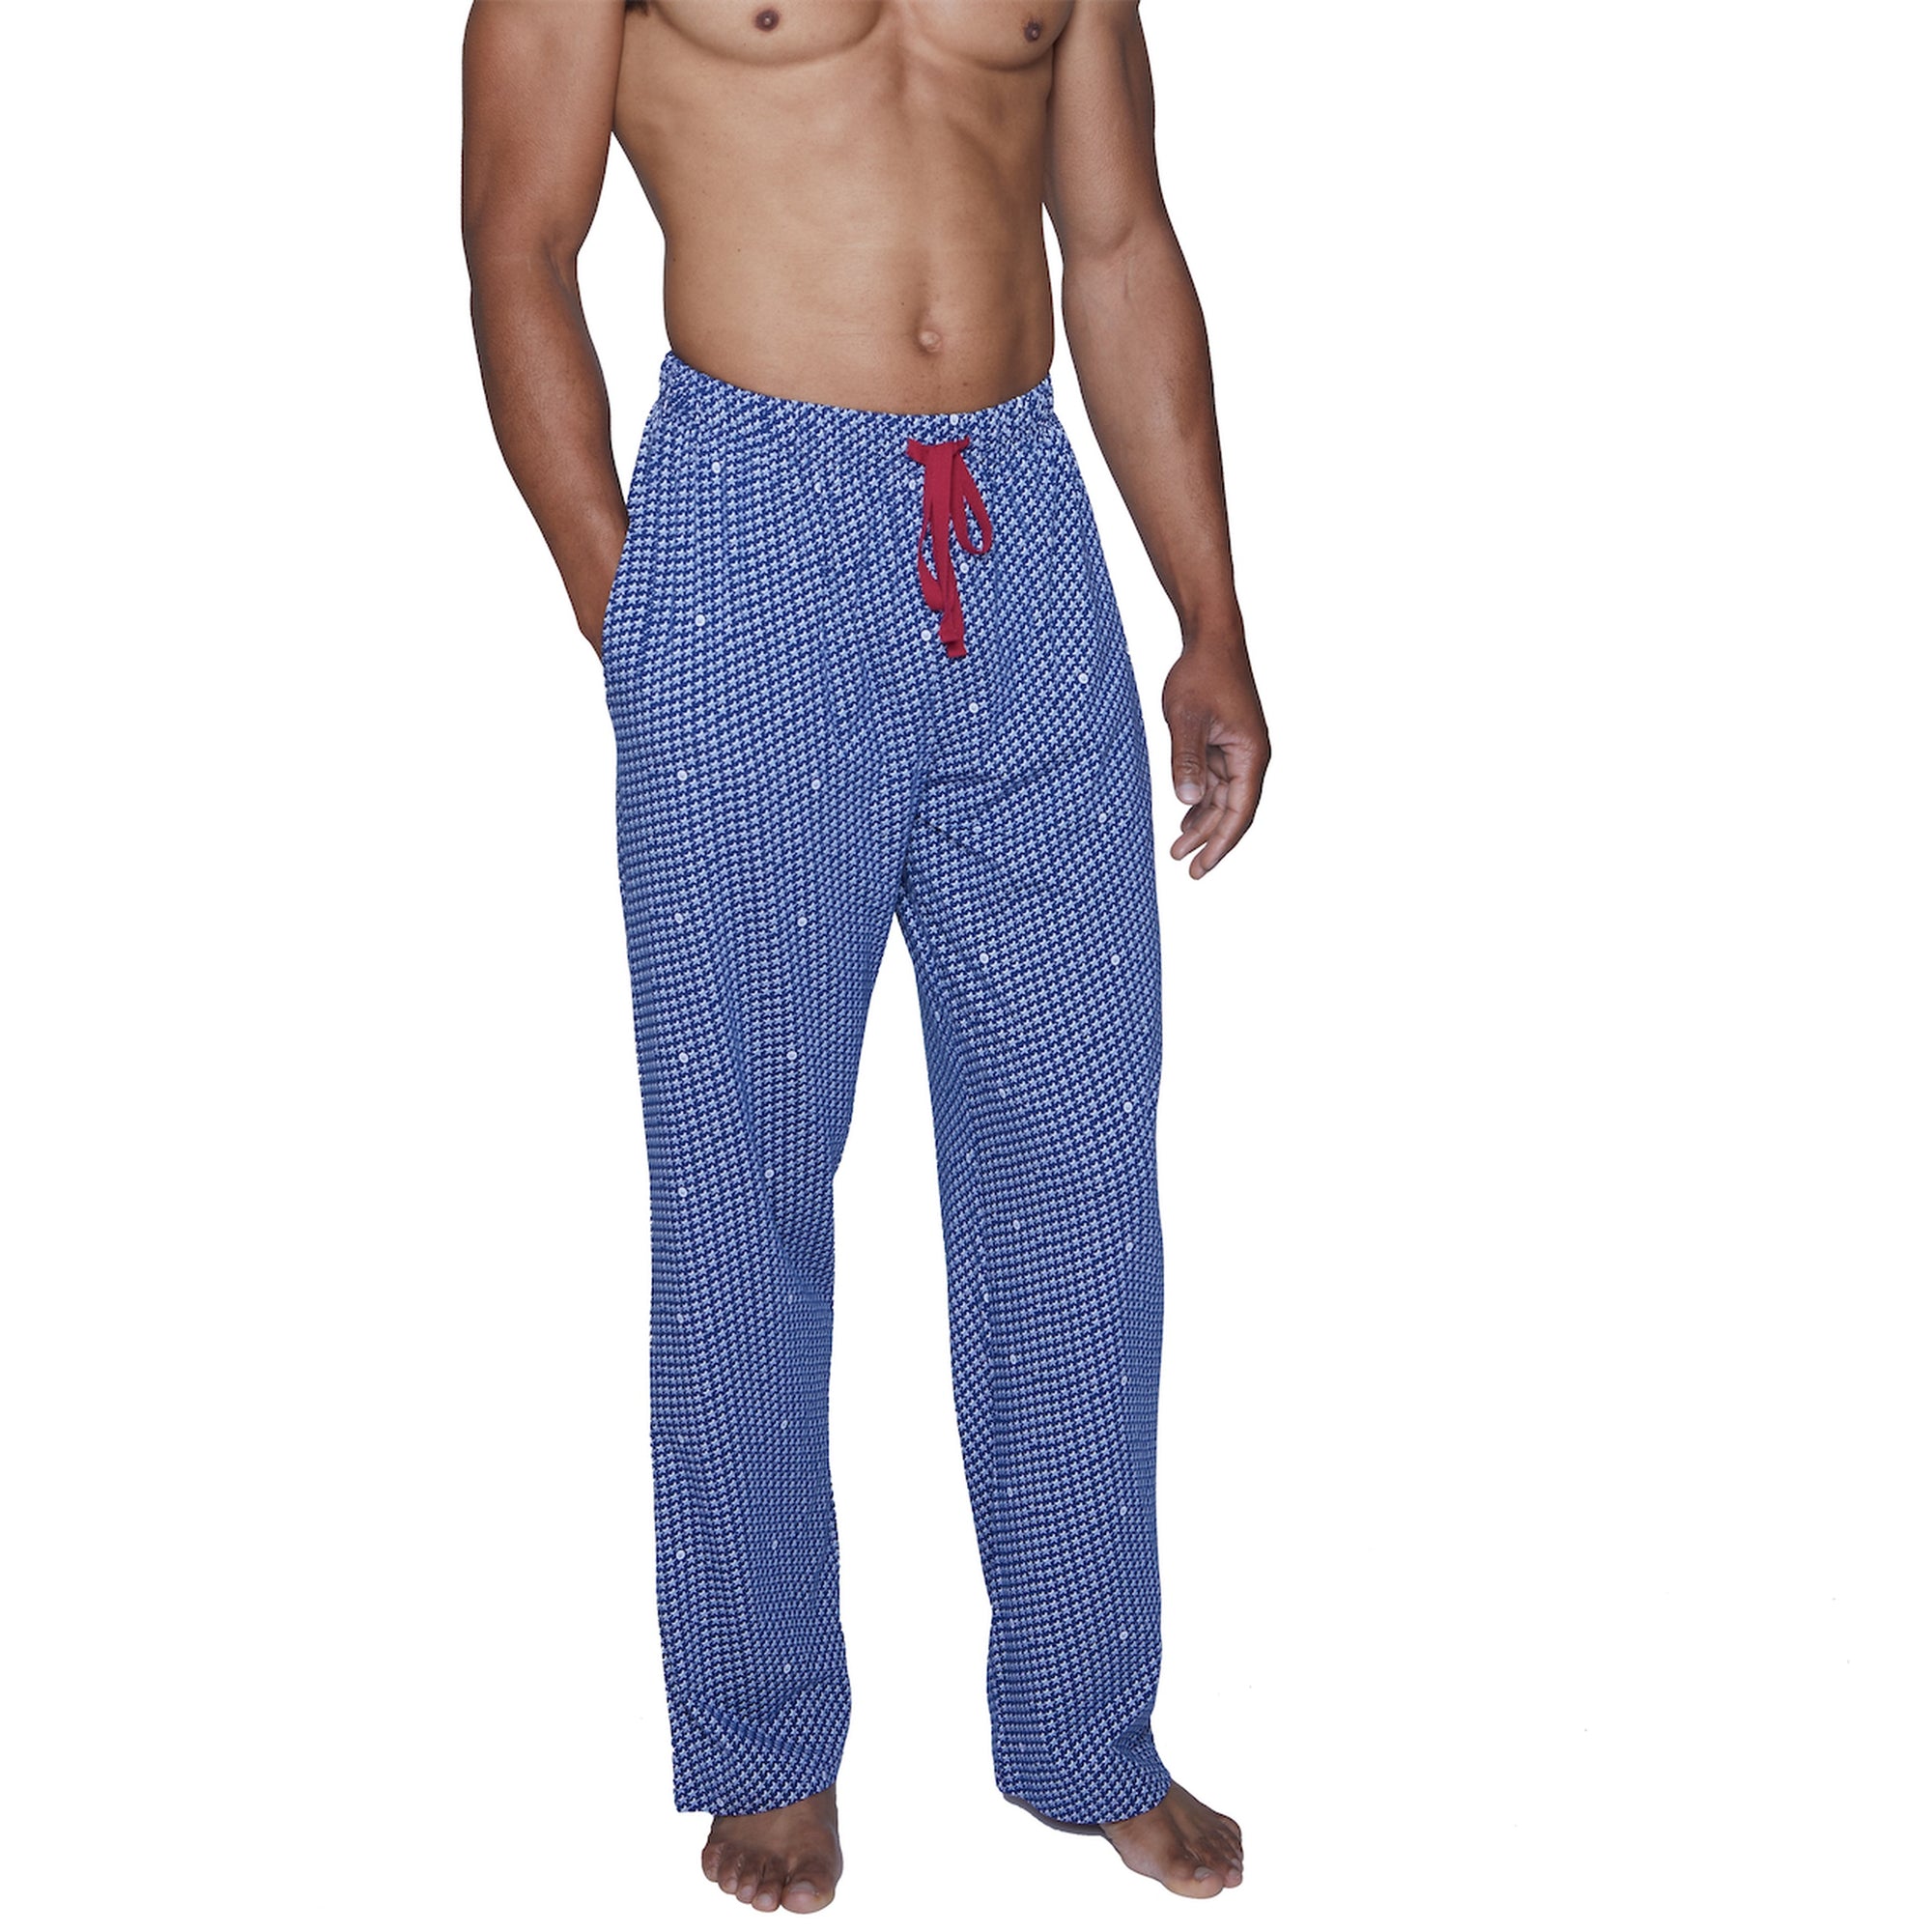 Lounge Pant with Draw String in Wood Stars by Wood Underwear